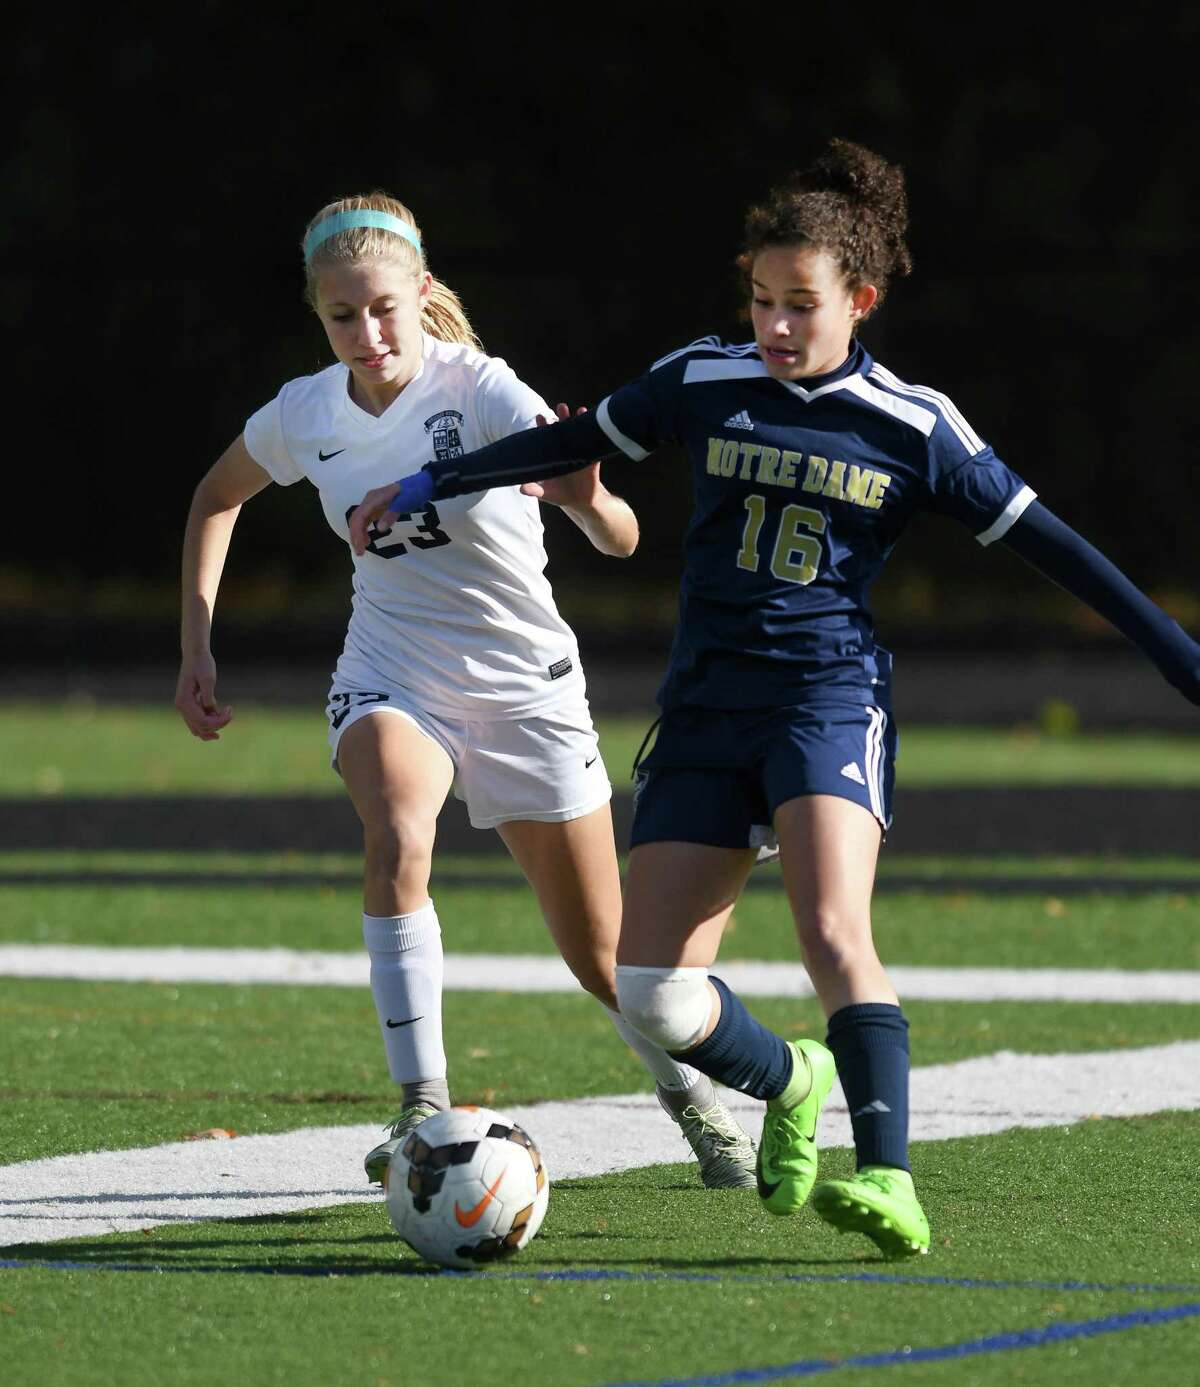 Avery Jarboe, left, of Immaculate, and Toni Domingos, right, compete for possession in the SWC semifinal girls soccer game between Notre Dame and Immaculate at Immaculate High, 10/30/17.